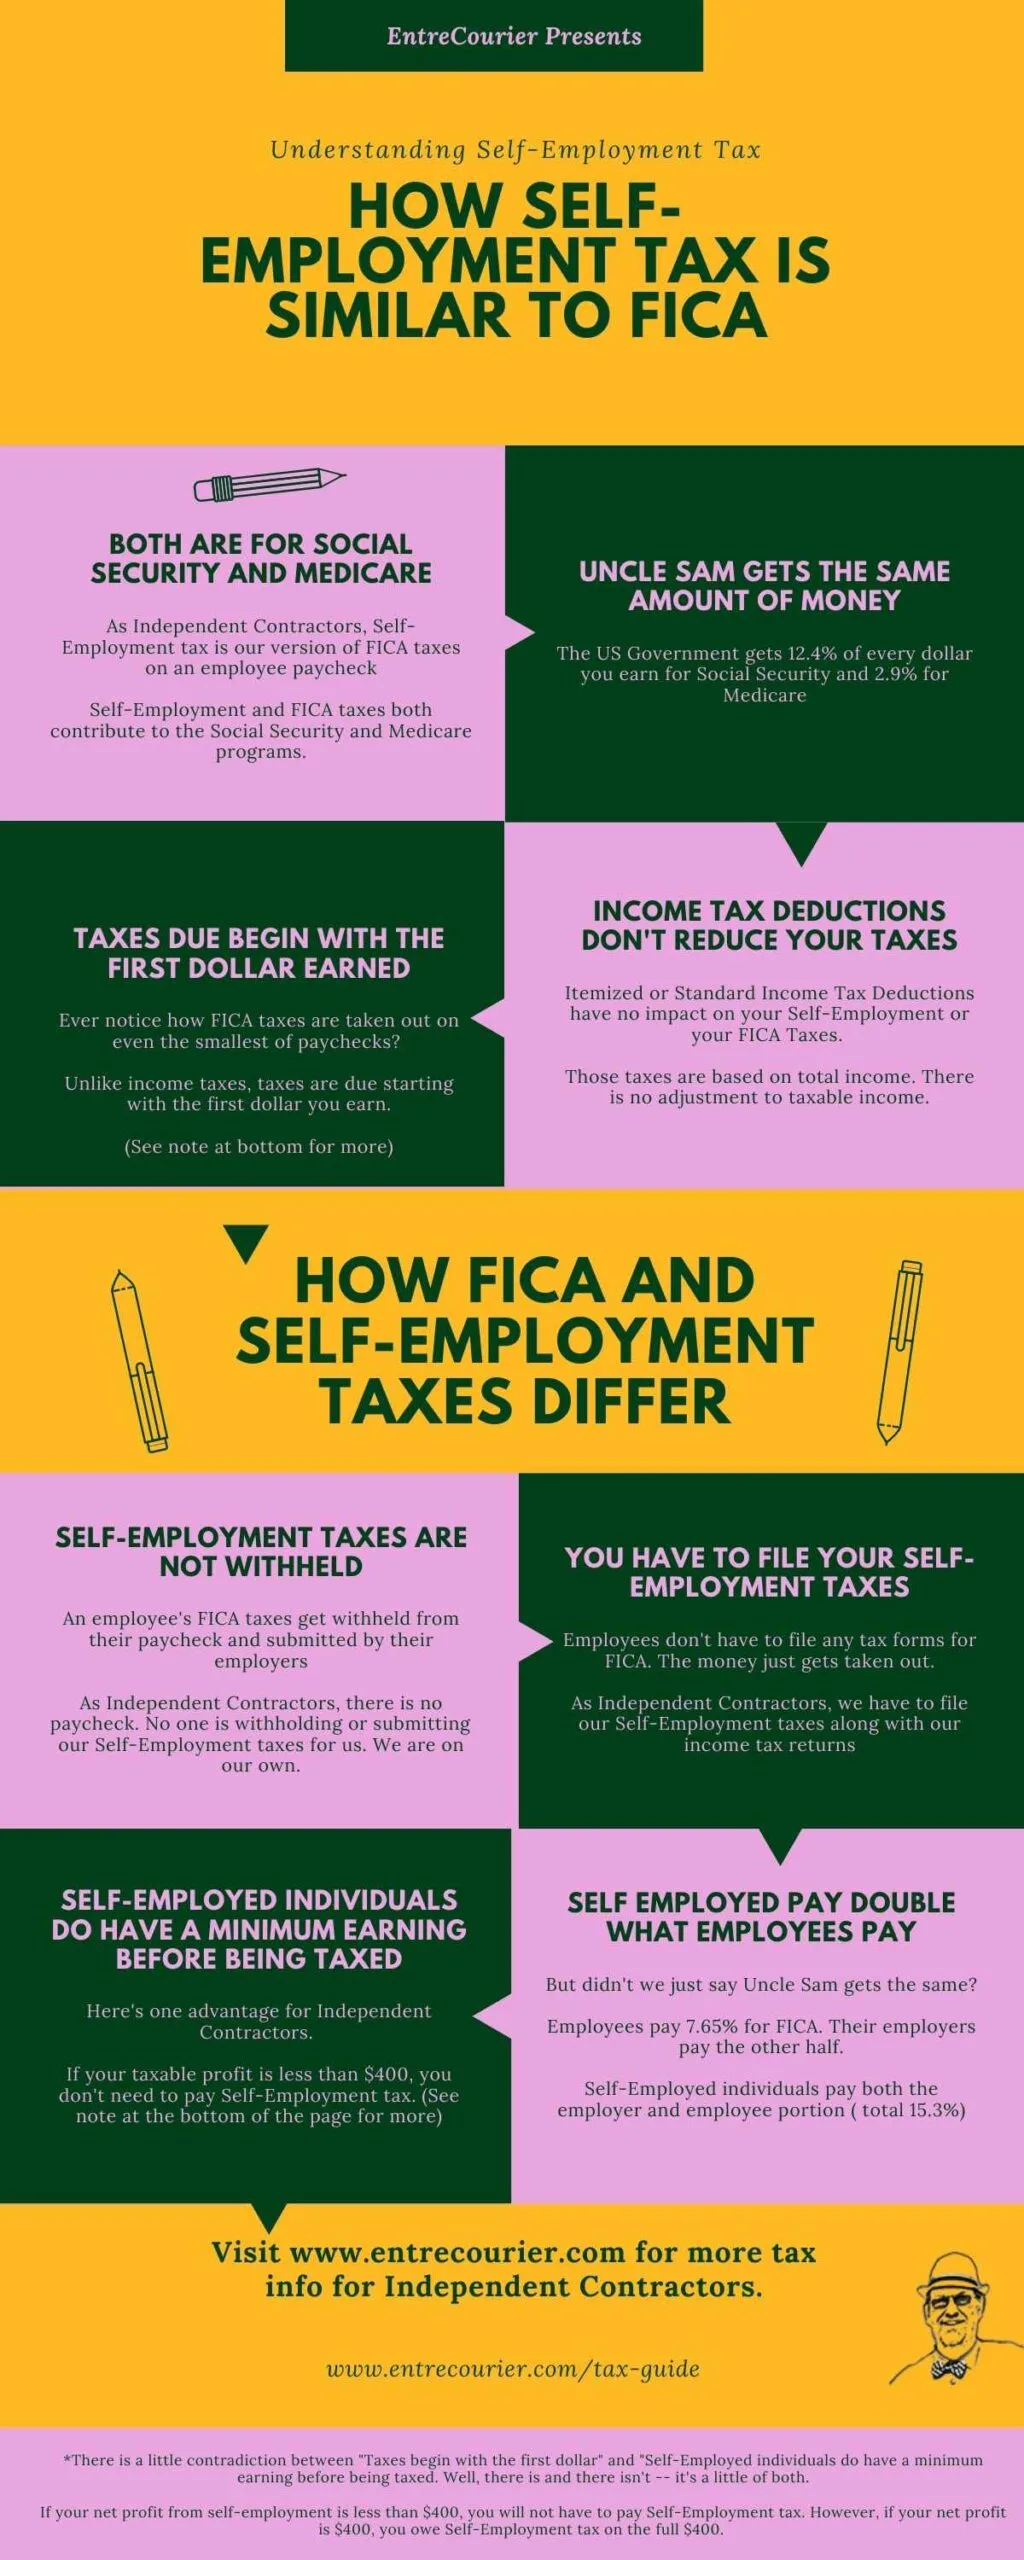 Infographic outlining similarities and differences between FICA and Self-Employment taxes